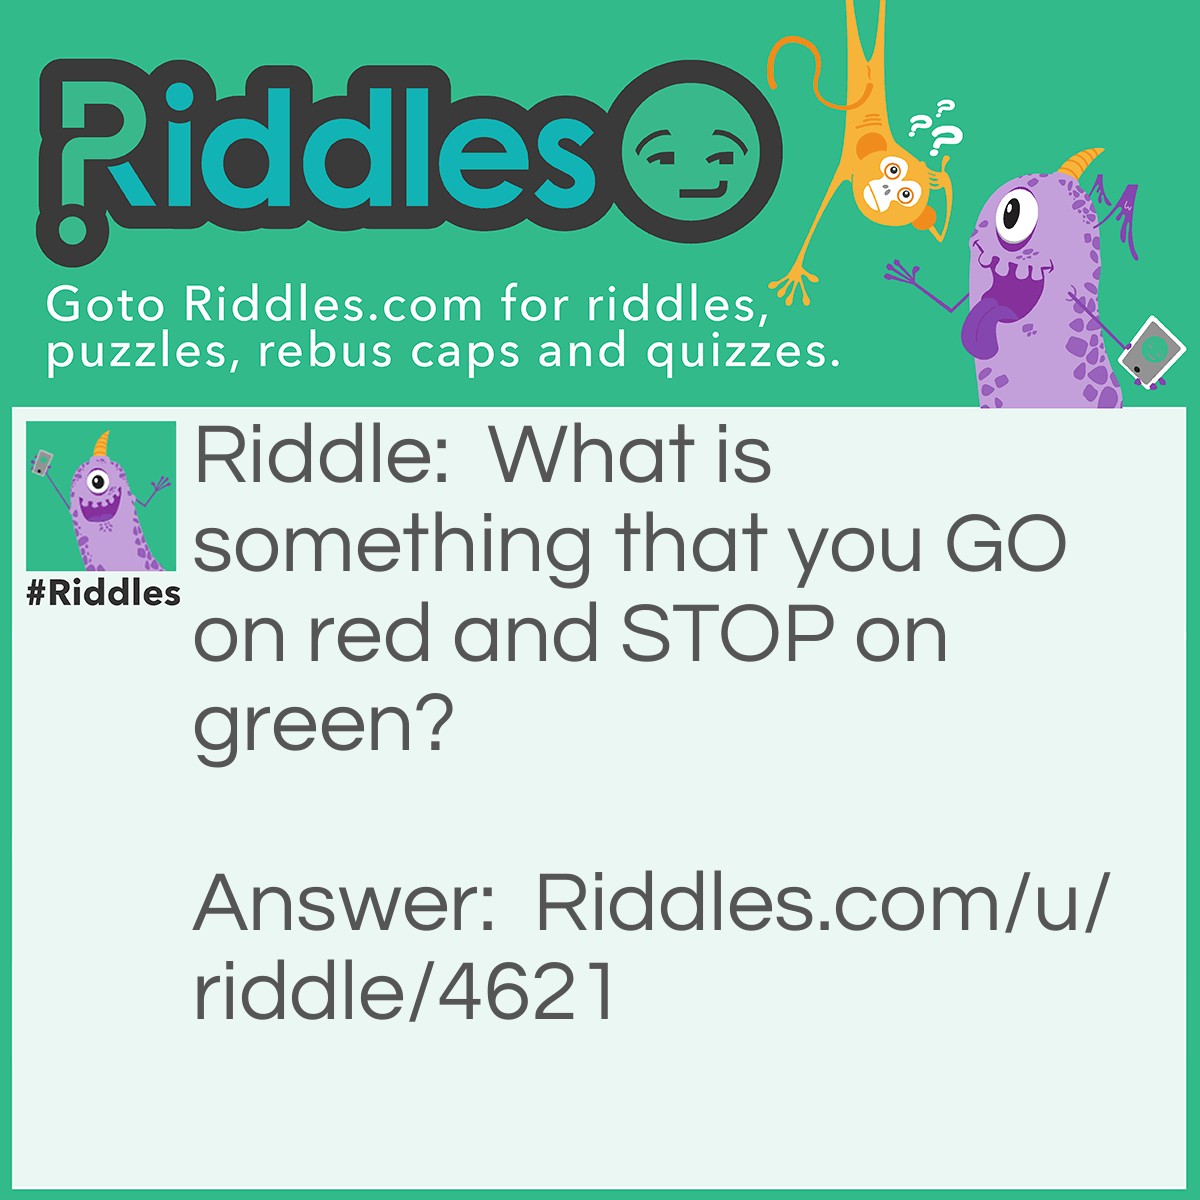 Riddle: What is something that you GO on red and STOP on green? Answer: A watermelon.